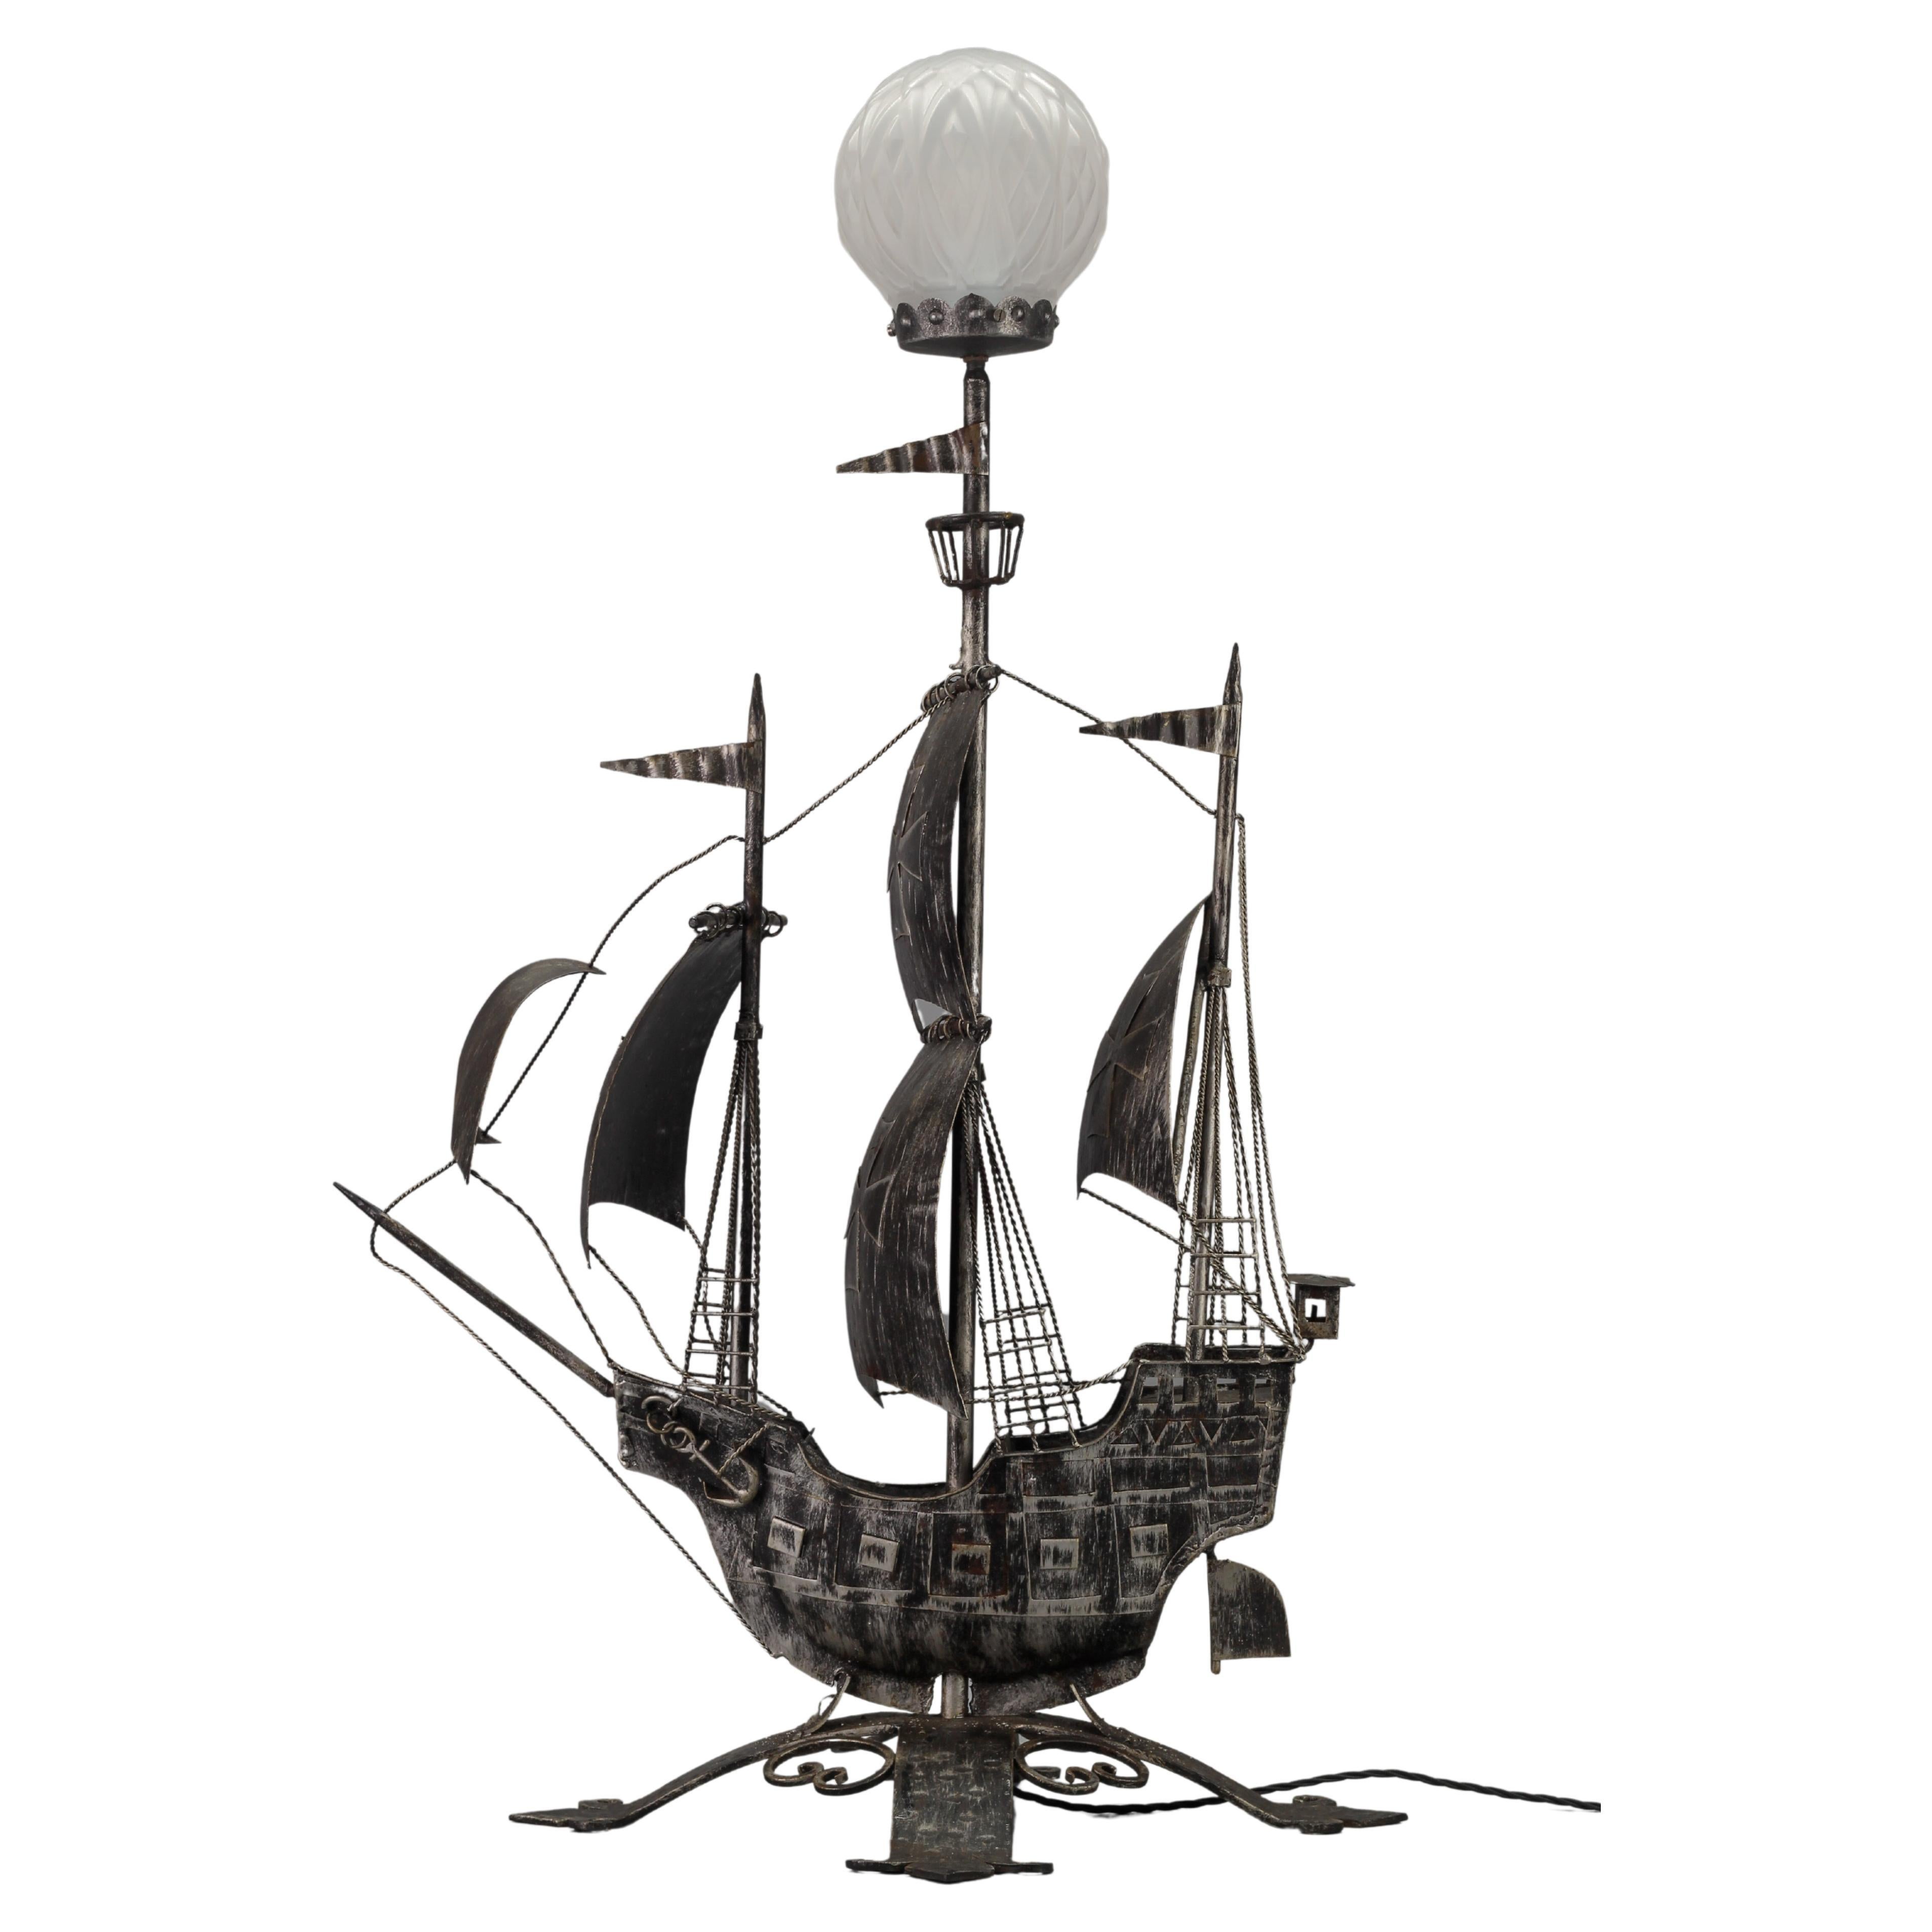 Wrought Iron and Glass Spanish Galleon Sailing Ship Shaped Floor Lamp, 1950s